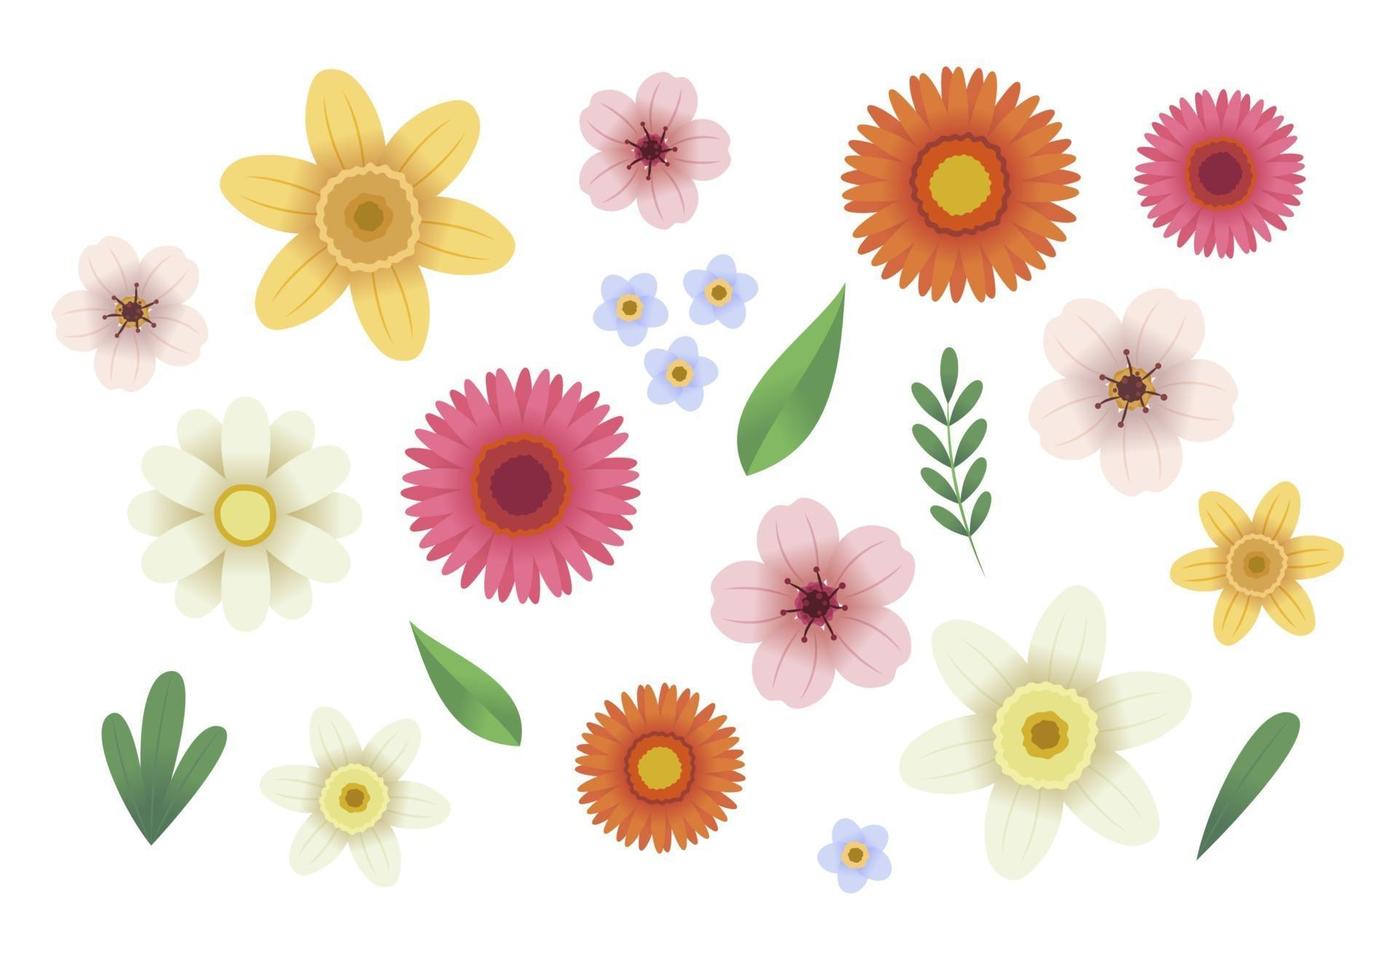 Flowers collection Vector illustration in flat style template for design